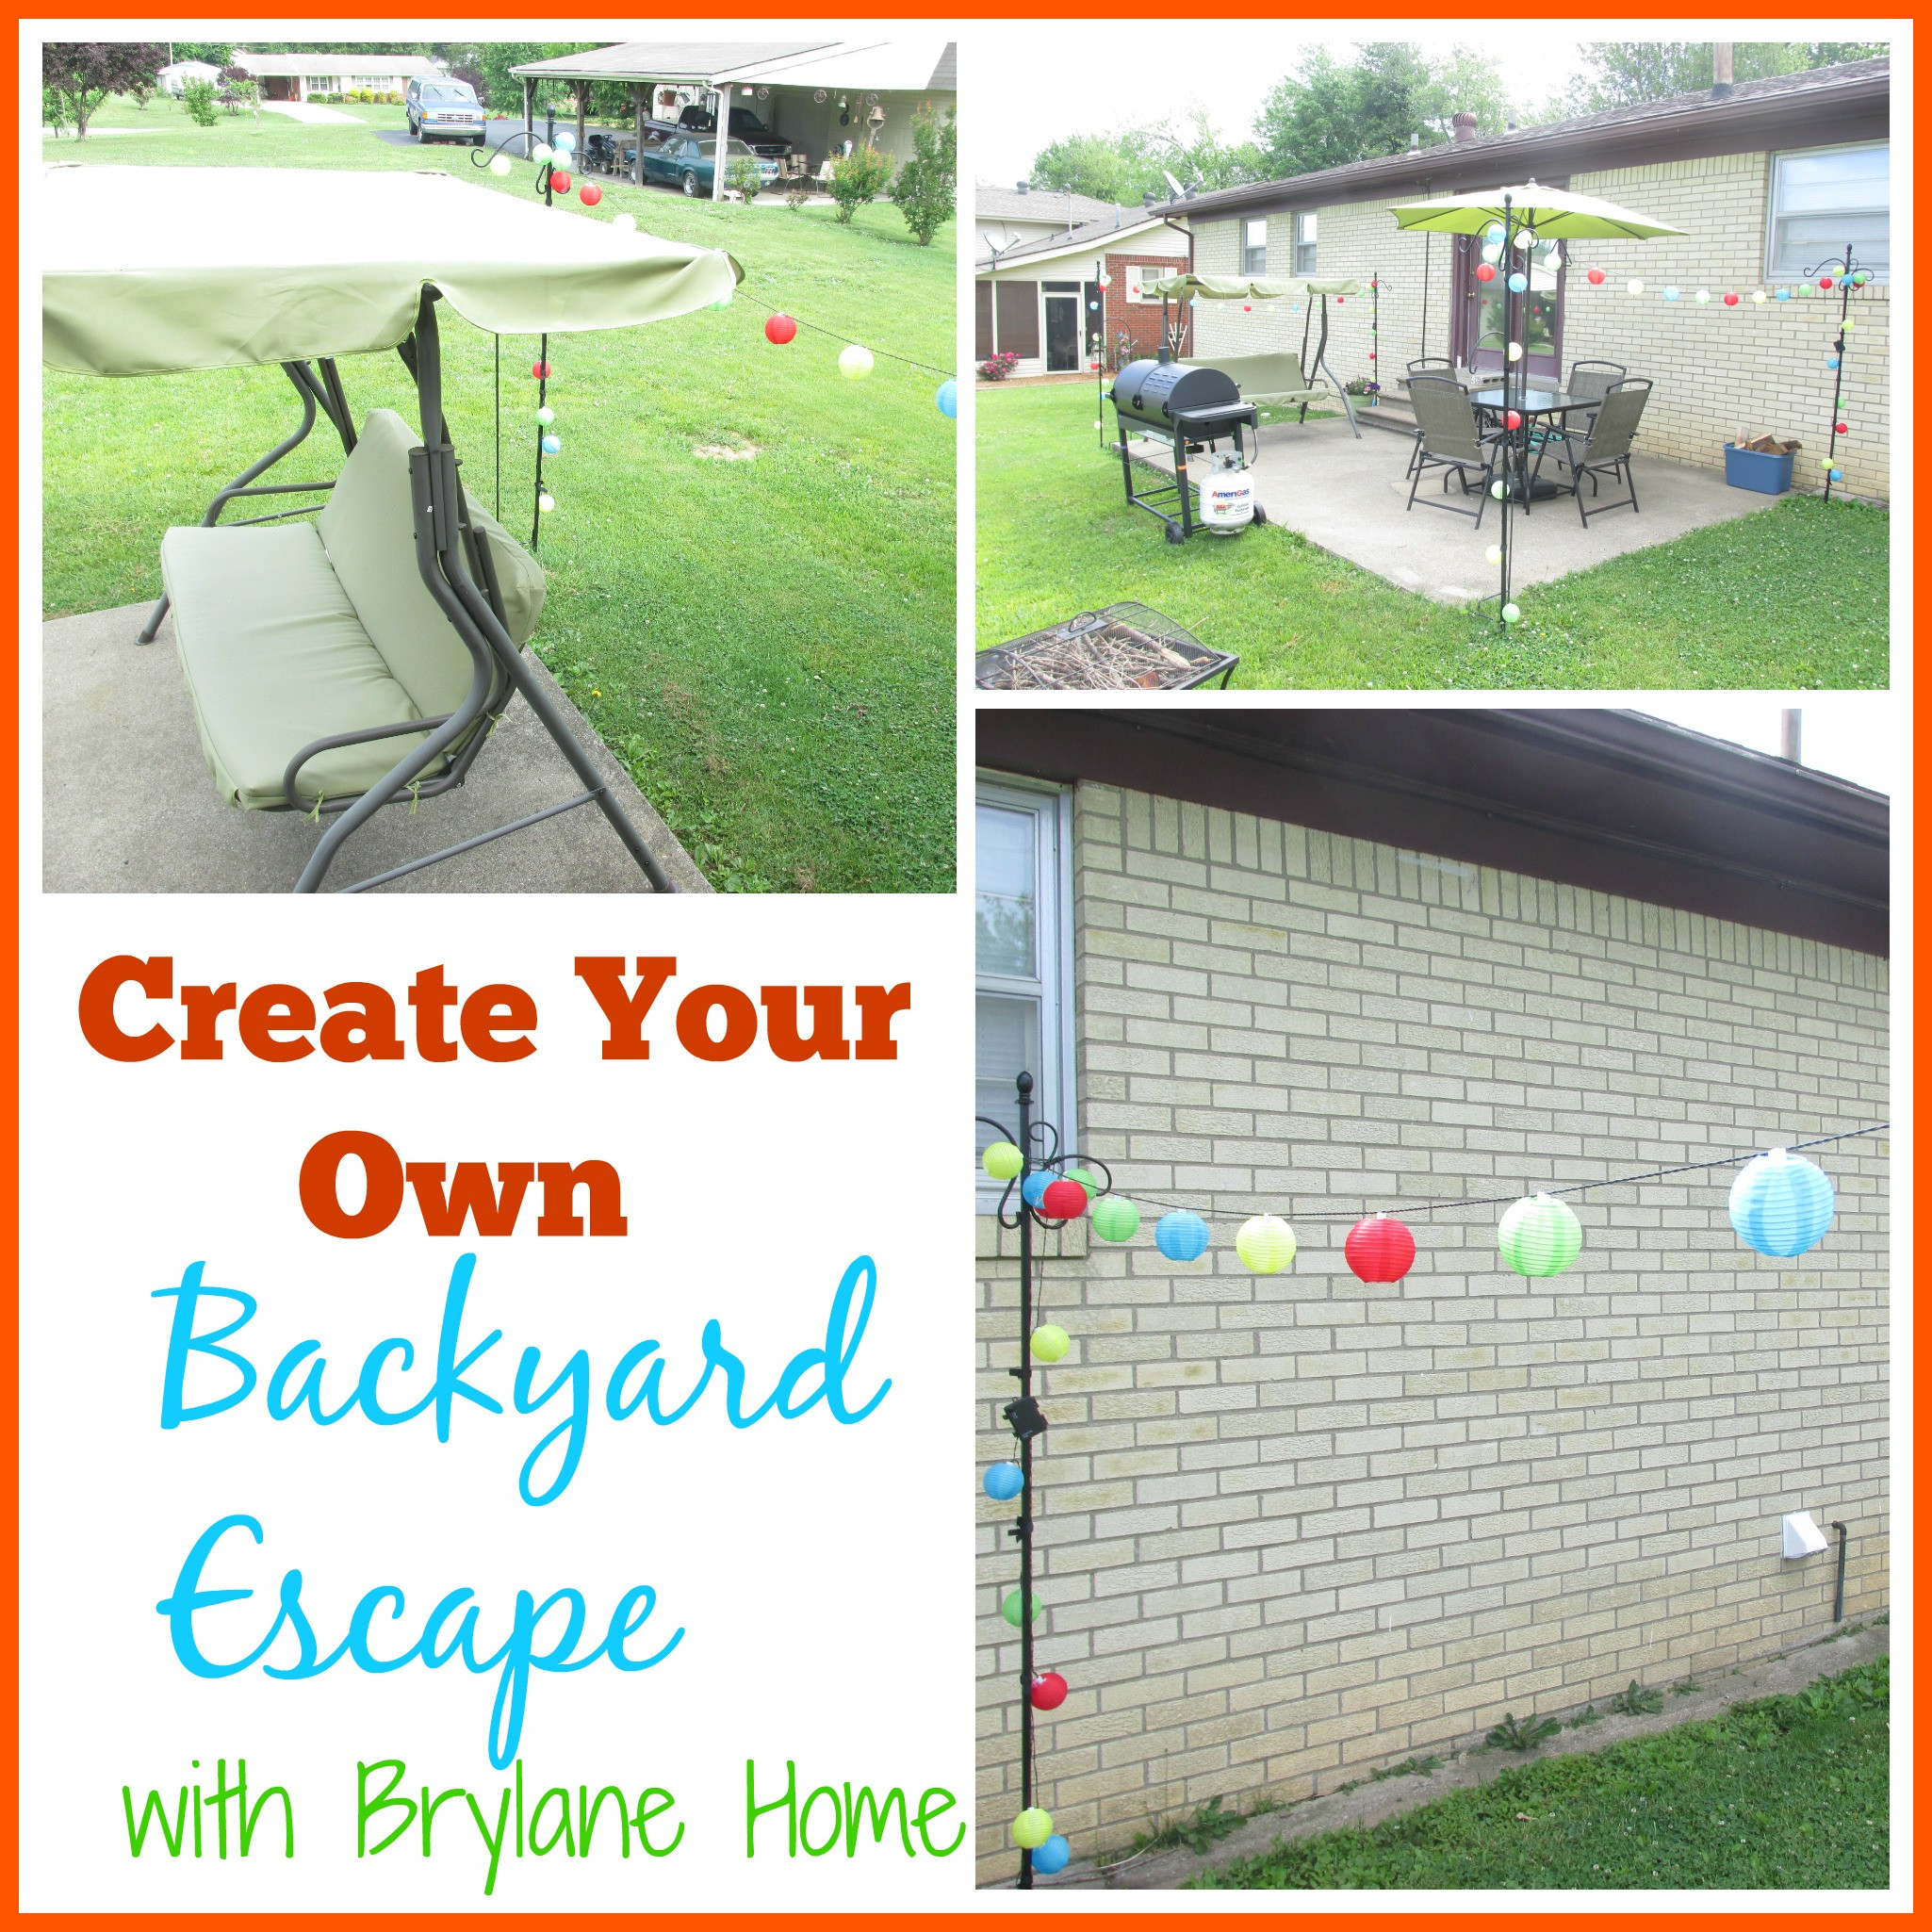 Design Your Own Backyard
 brylane home Archives Jen Around the World